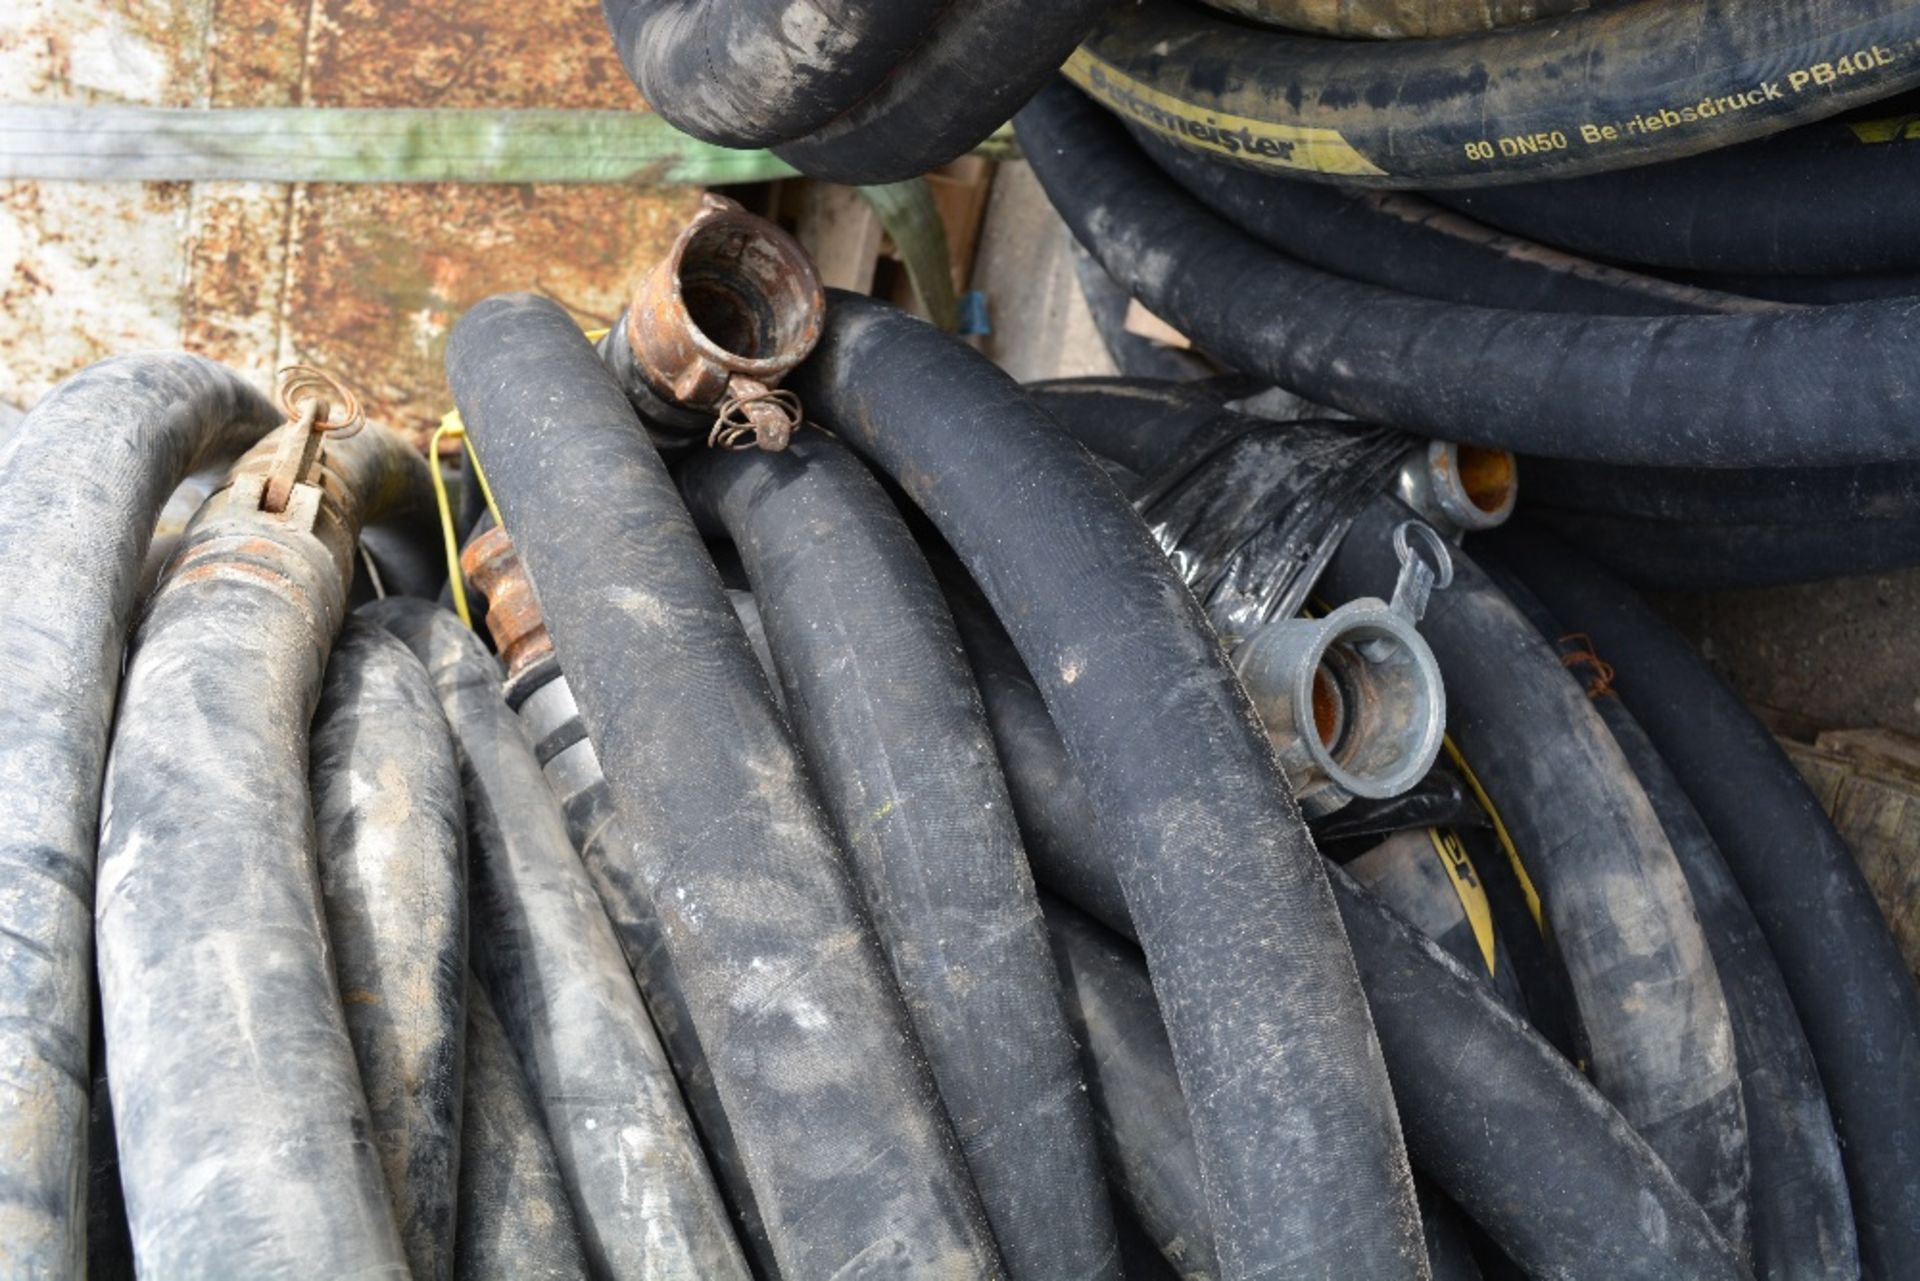 ASSORTED GROUT / SCREED PIPES (1 PALLET), ID: PL-15661, RUISLIP PLANT HIRE LTD. *UNRESERVED* - Bild 5 aus 5